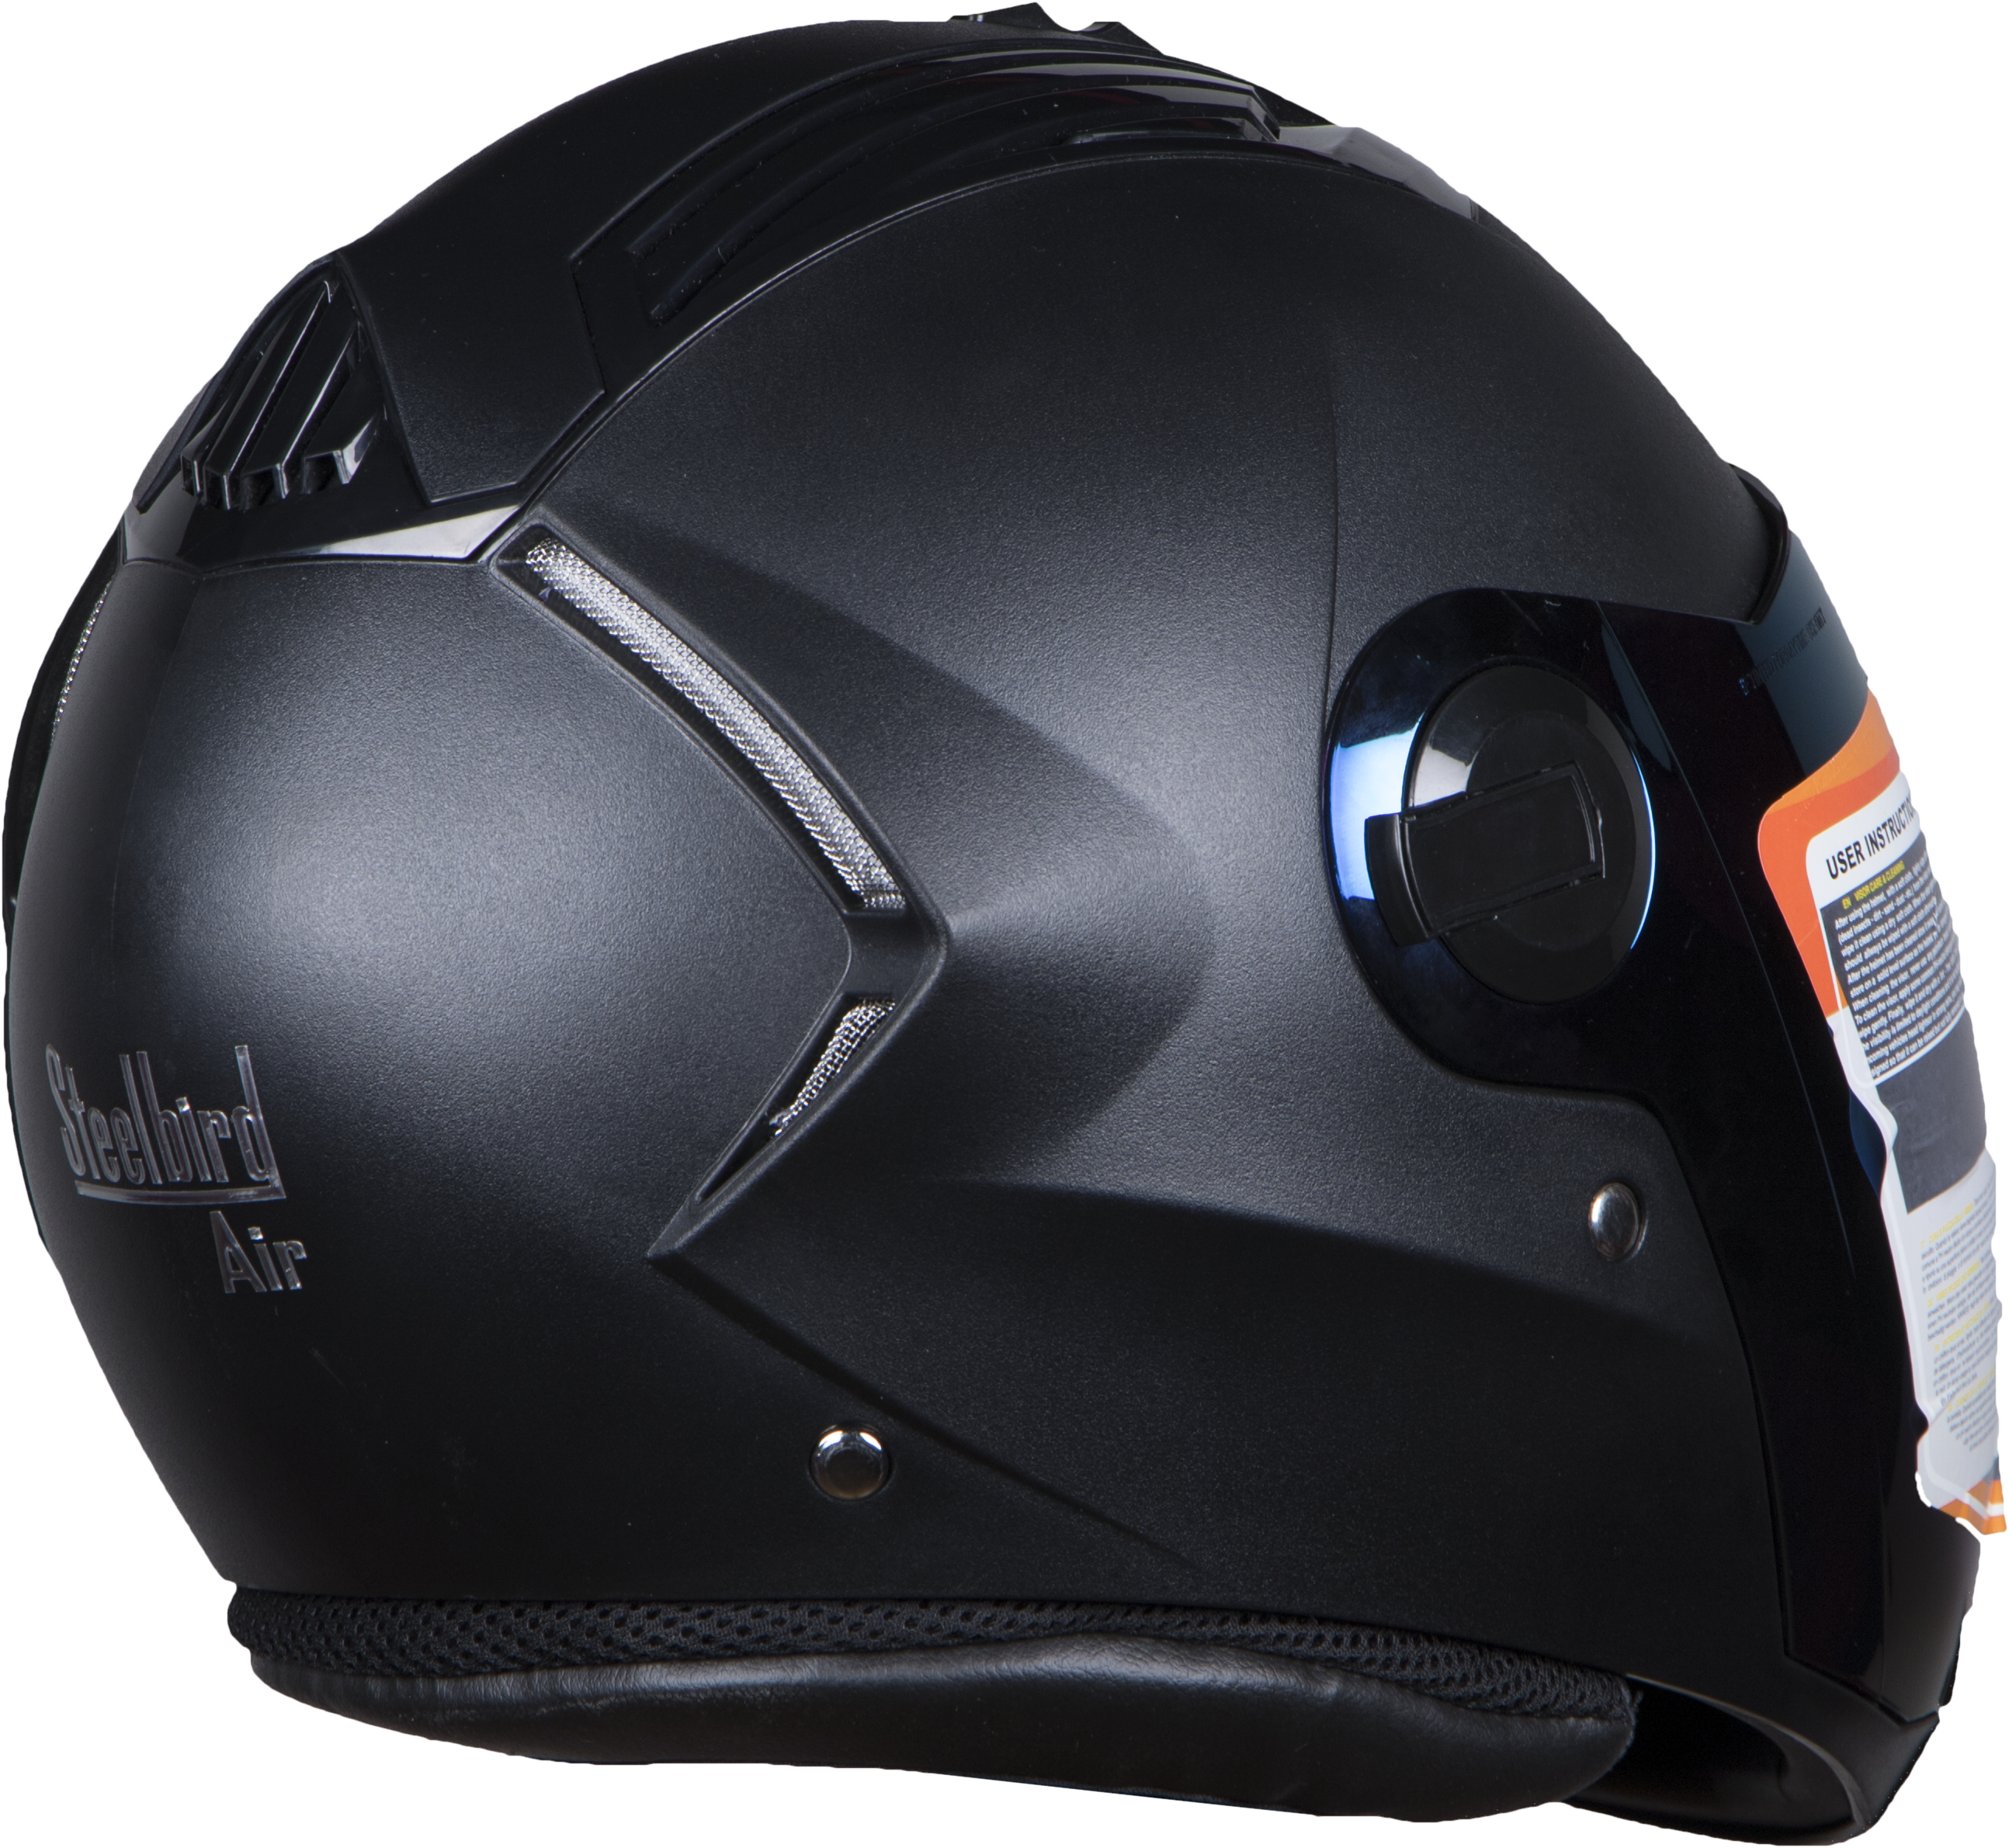 SBA-2 DASHING BLACK (FITTED WITH CLEAR VISOR EXTRA GOLD CHROME VISOR FREE)